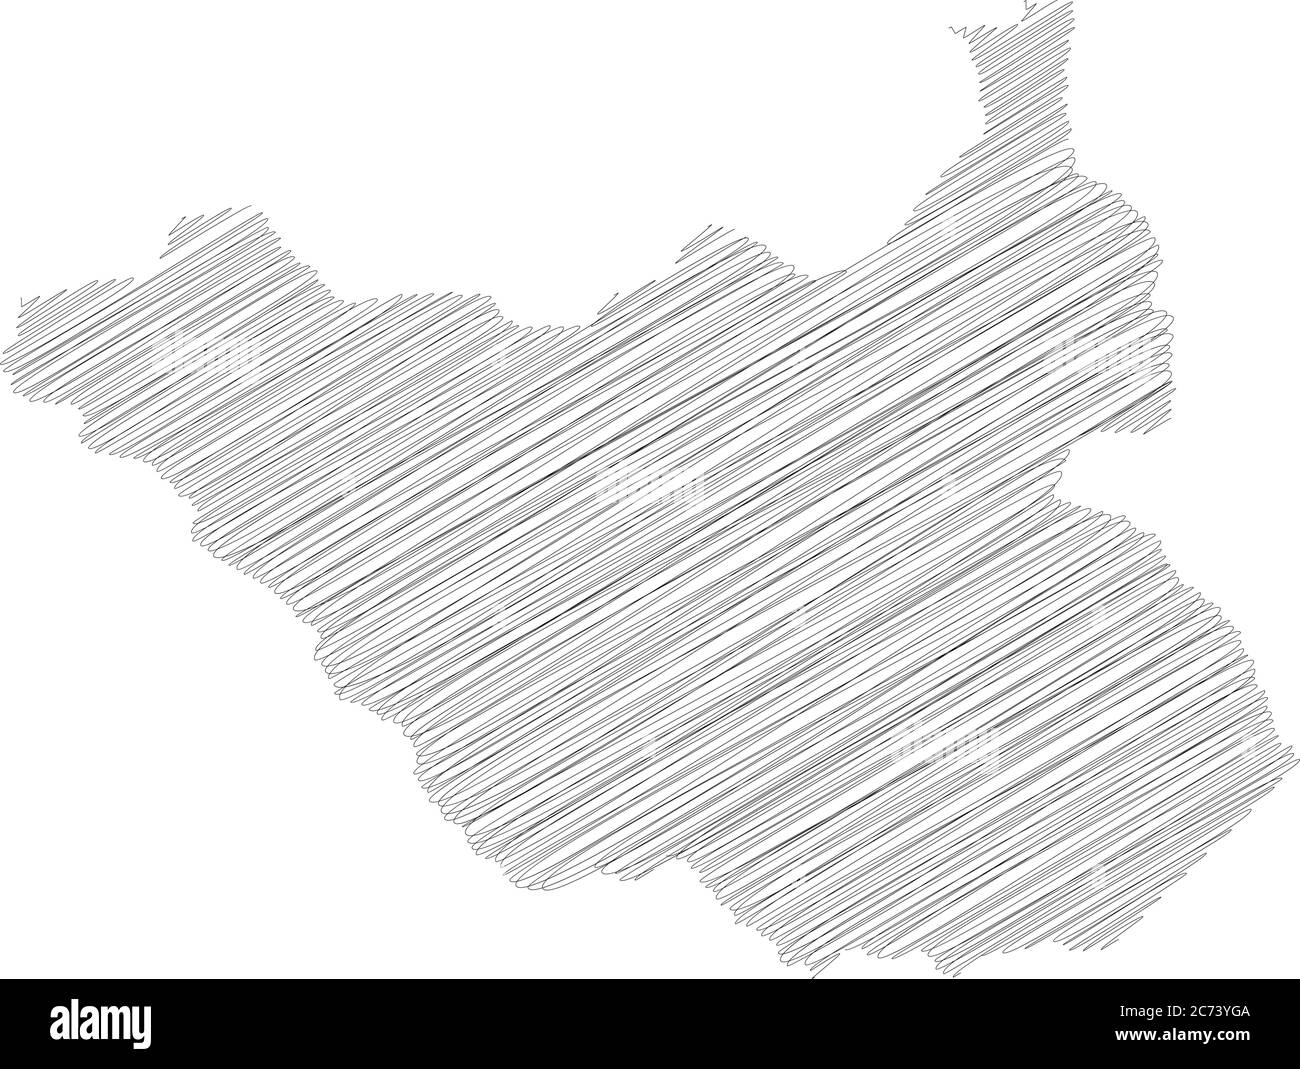 South Sudan - solid black silhouette map of country area. Simple flat vector illustration. Stock Vector